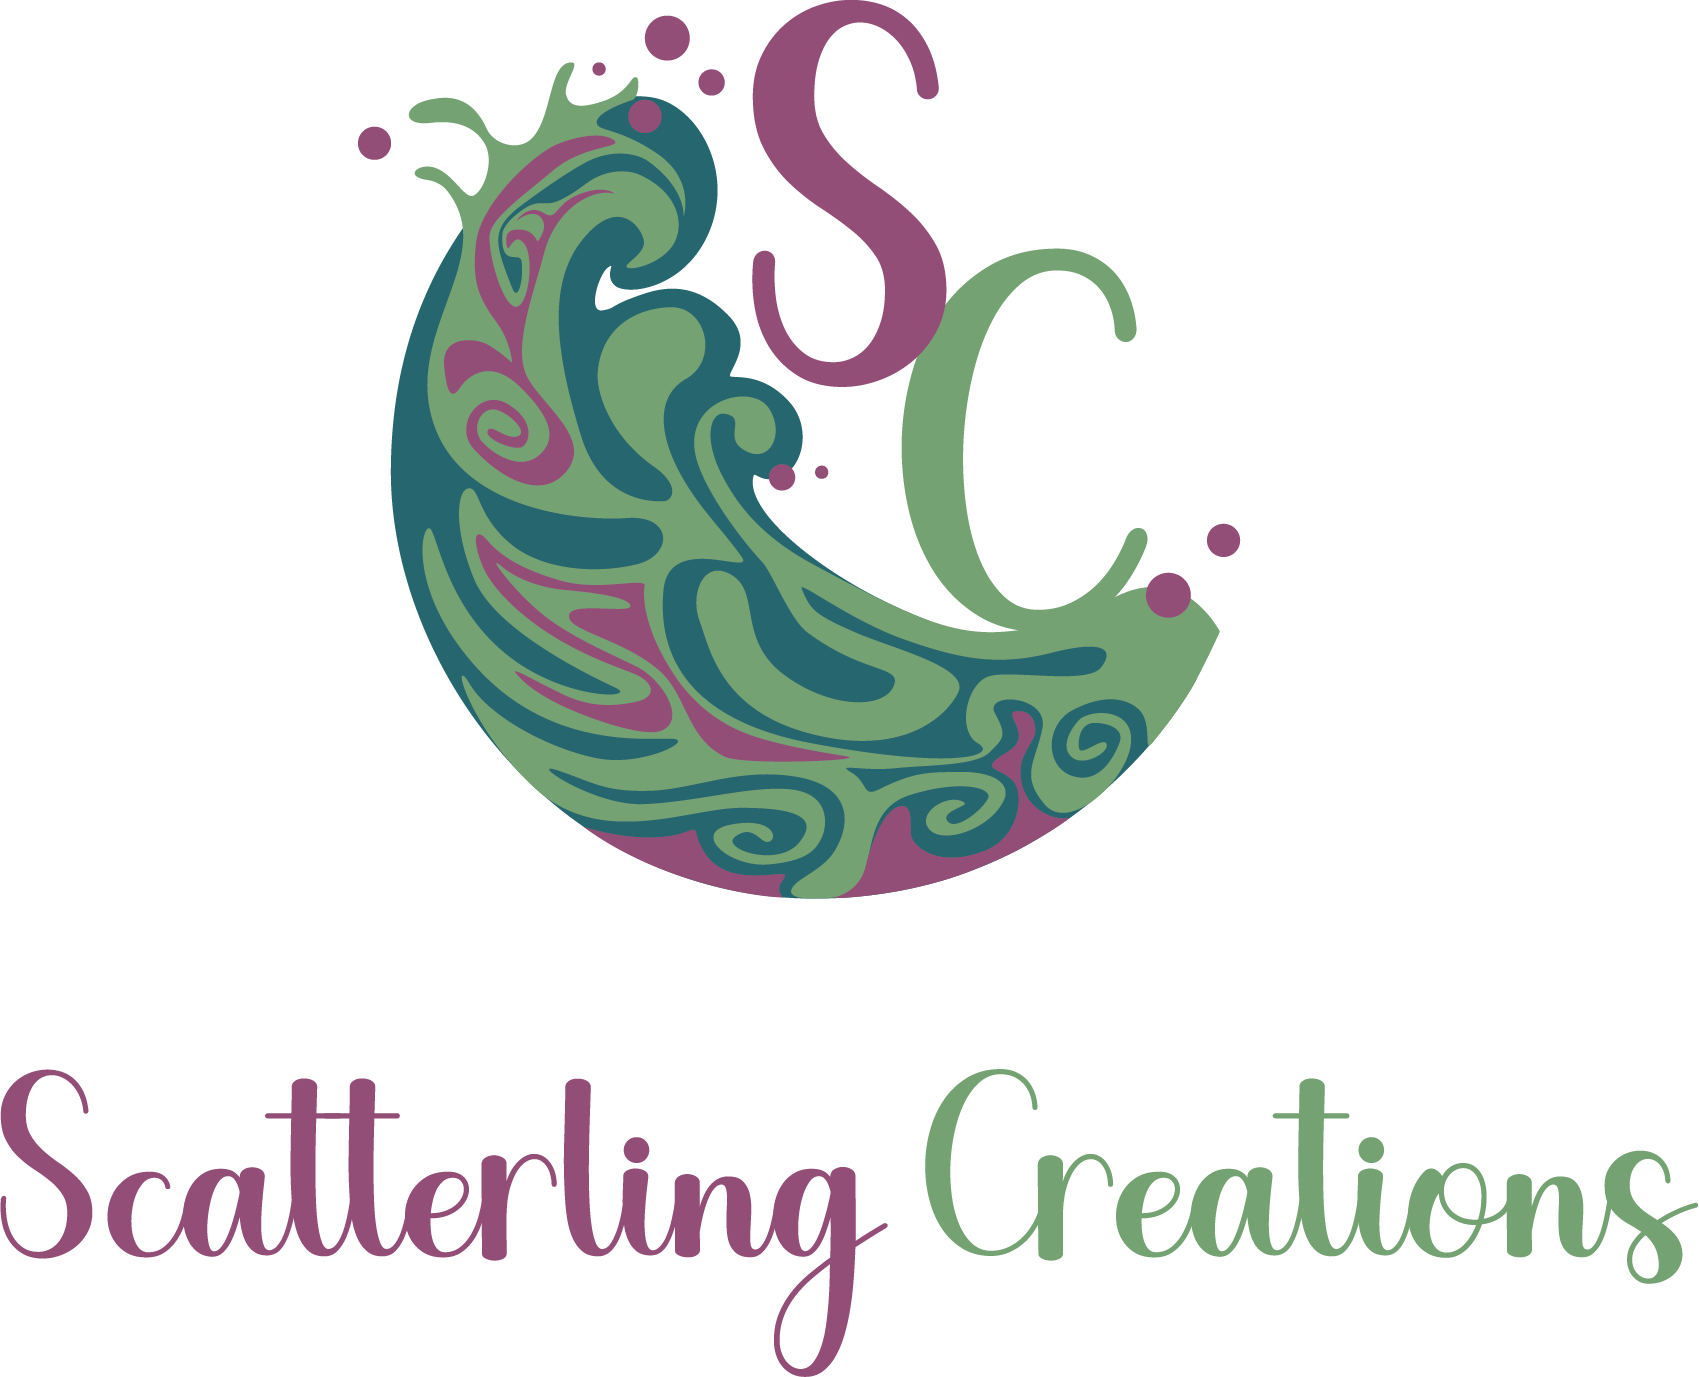 Scatterling Creations